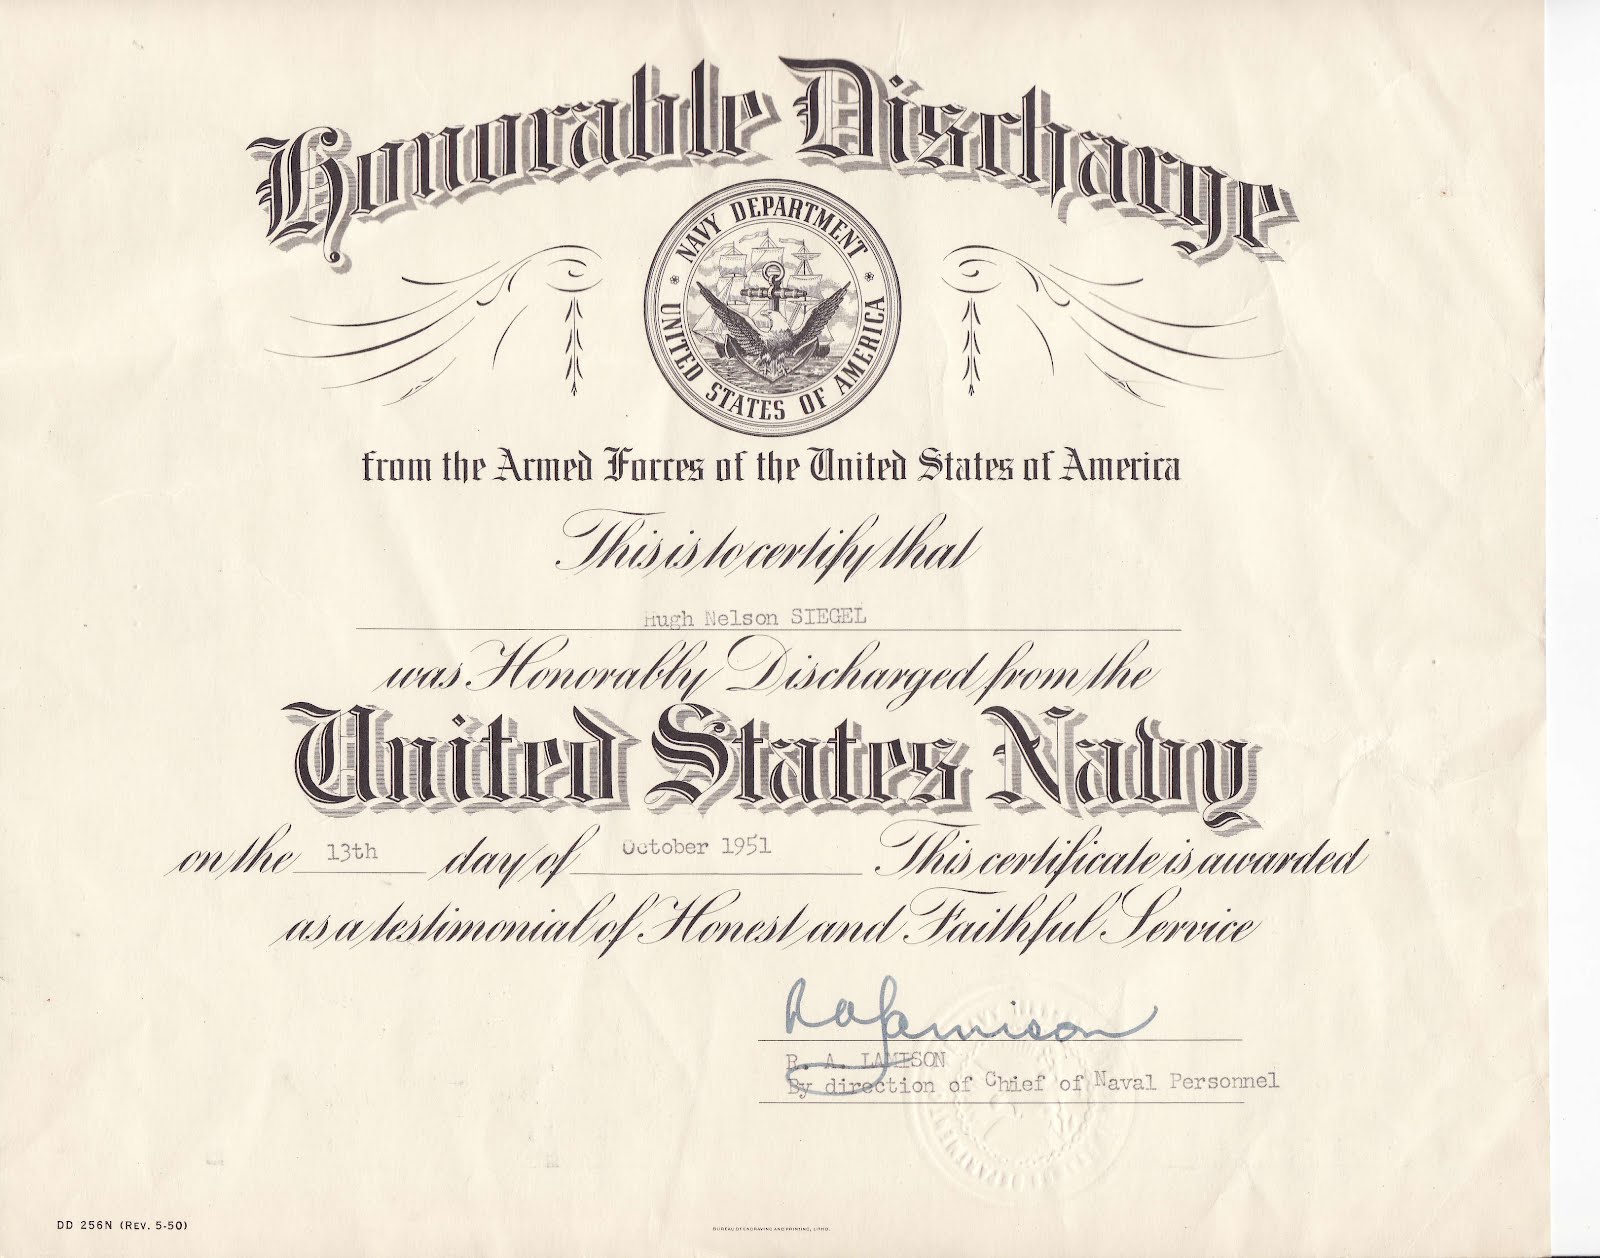 GRANDPA'S NAVY: Honorable Discharge